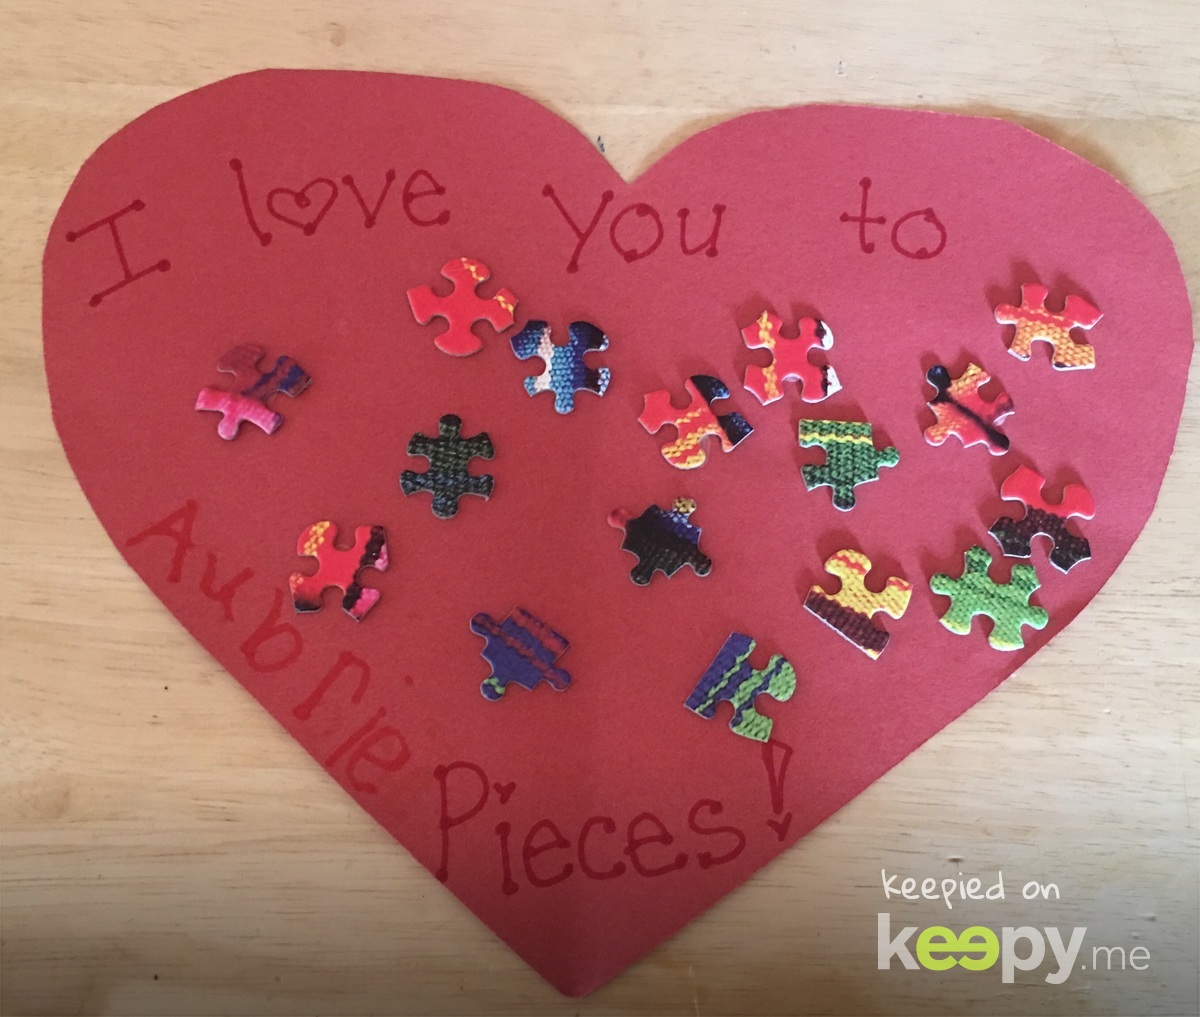 Pieces of My Heart » Keepy.me